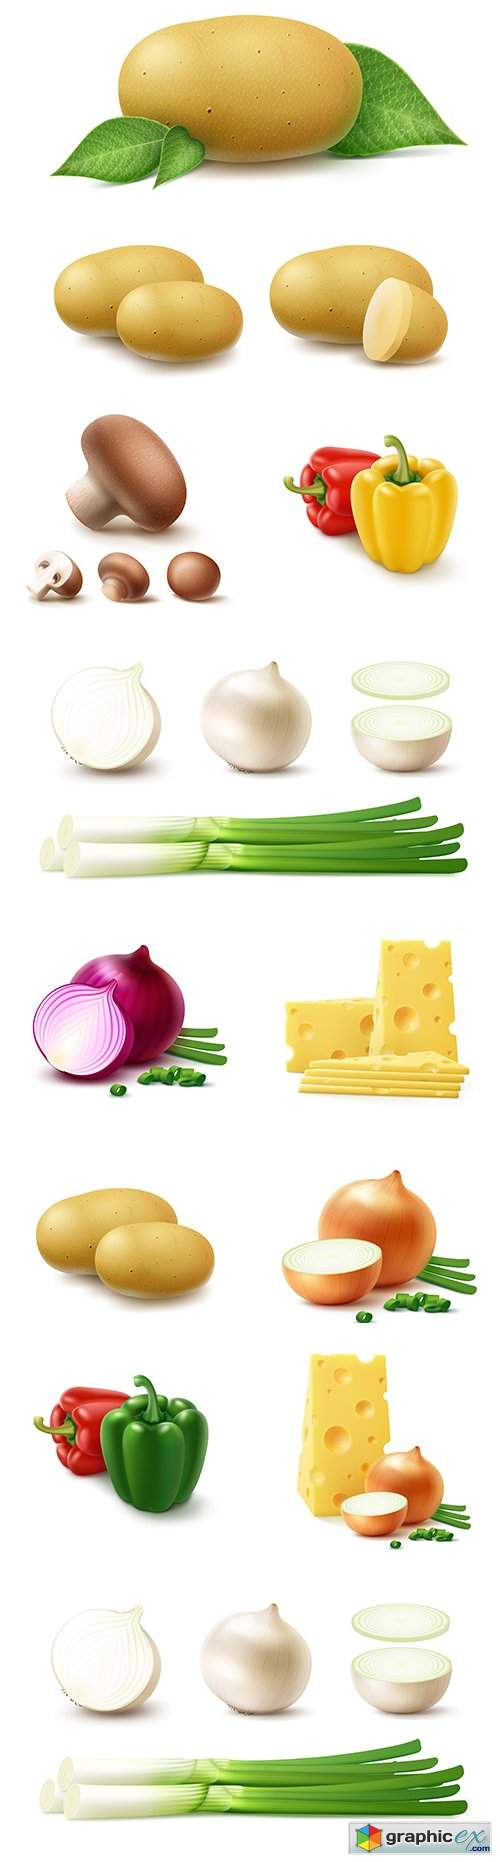  Vegetables whole and chopped 3d realistic illustrations 